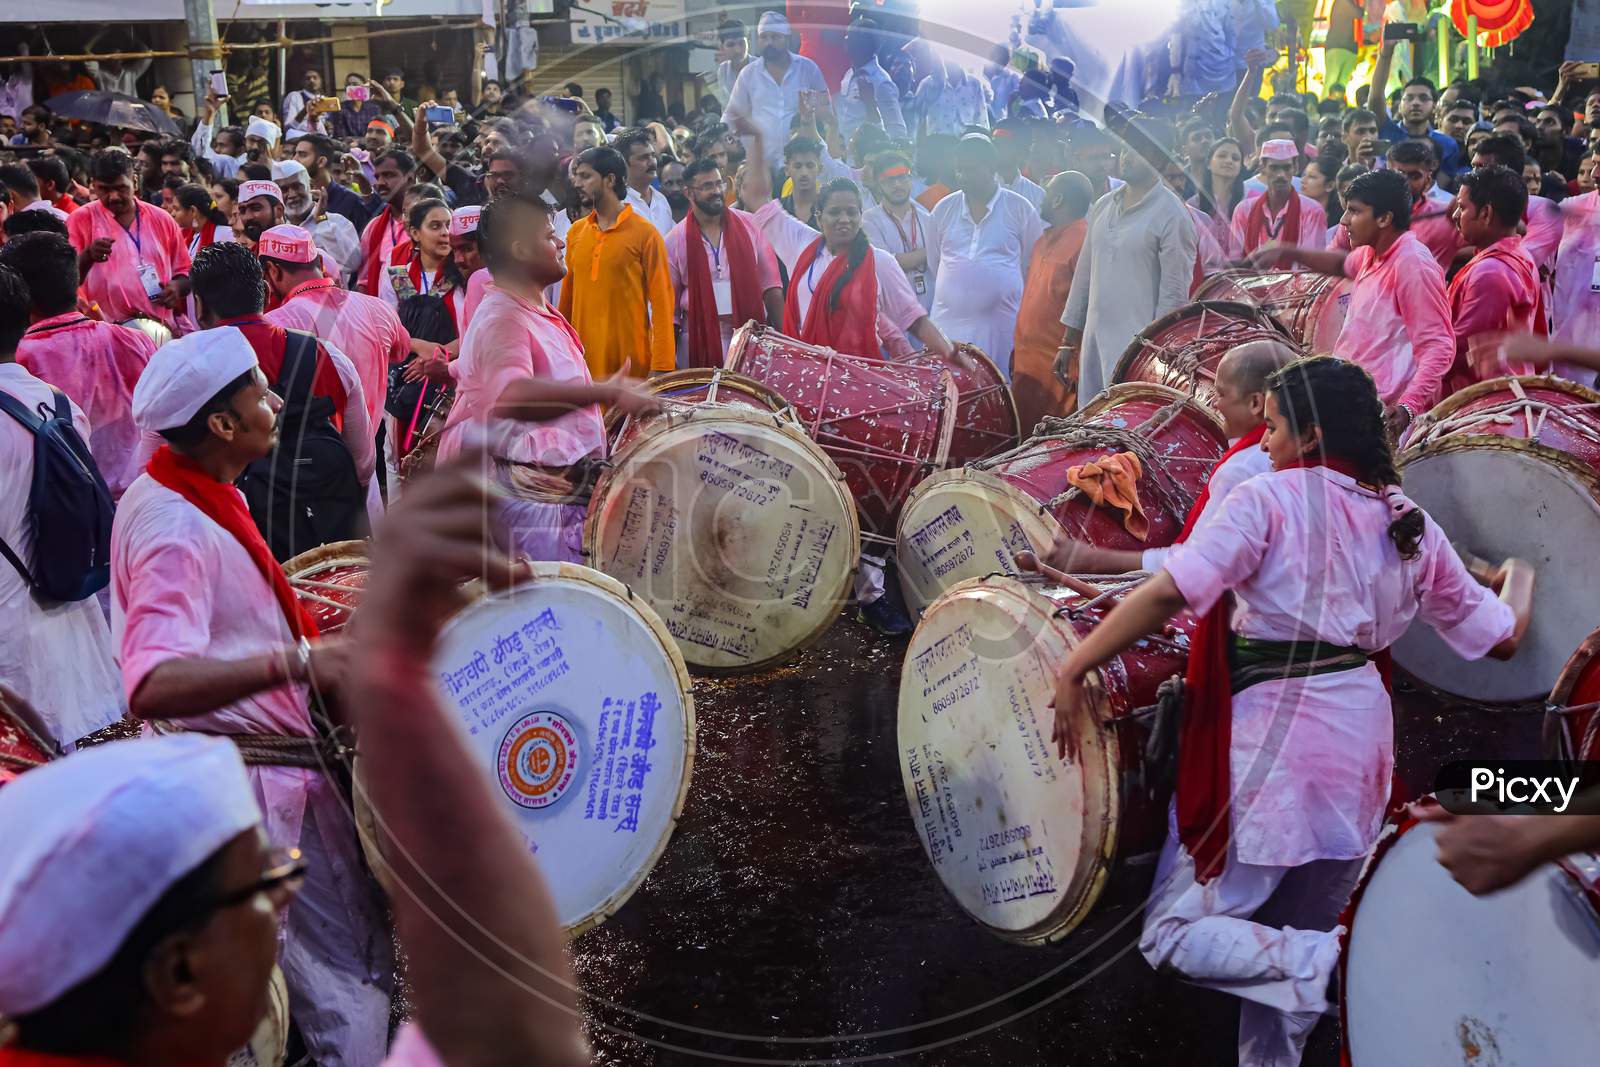 A group of devotees beating drums during the festival of an Indian God Ganesh Puja